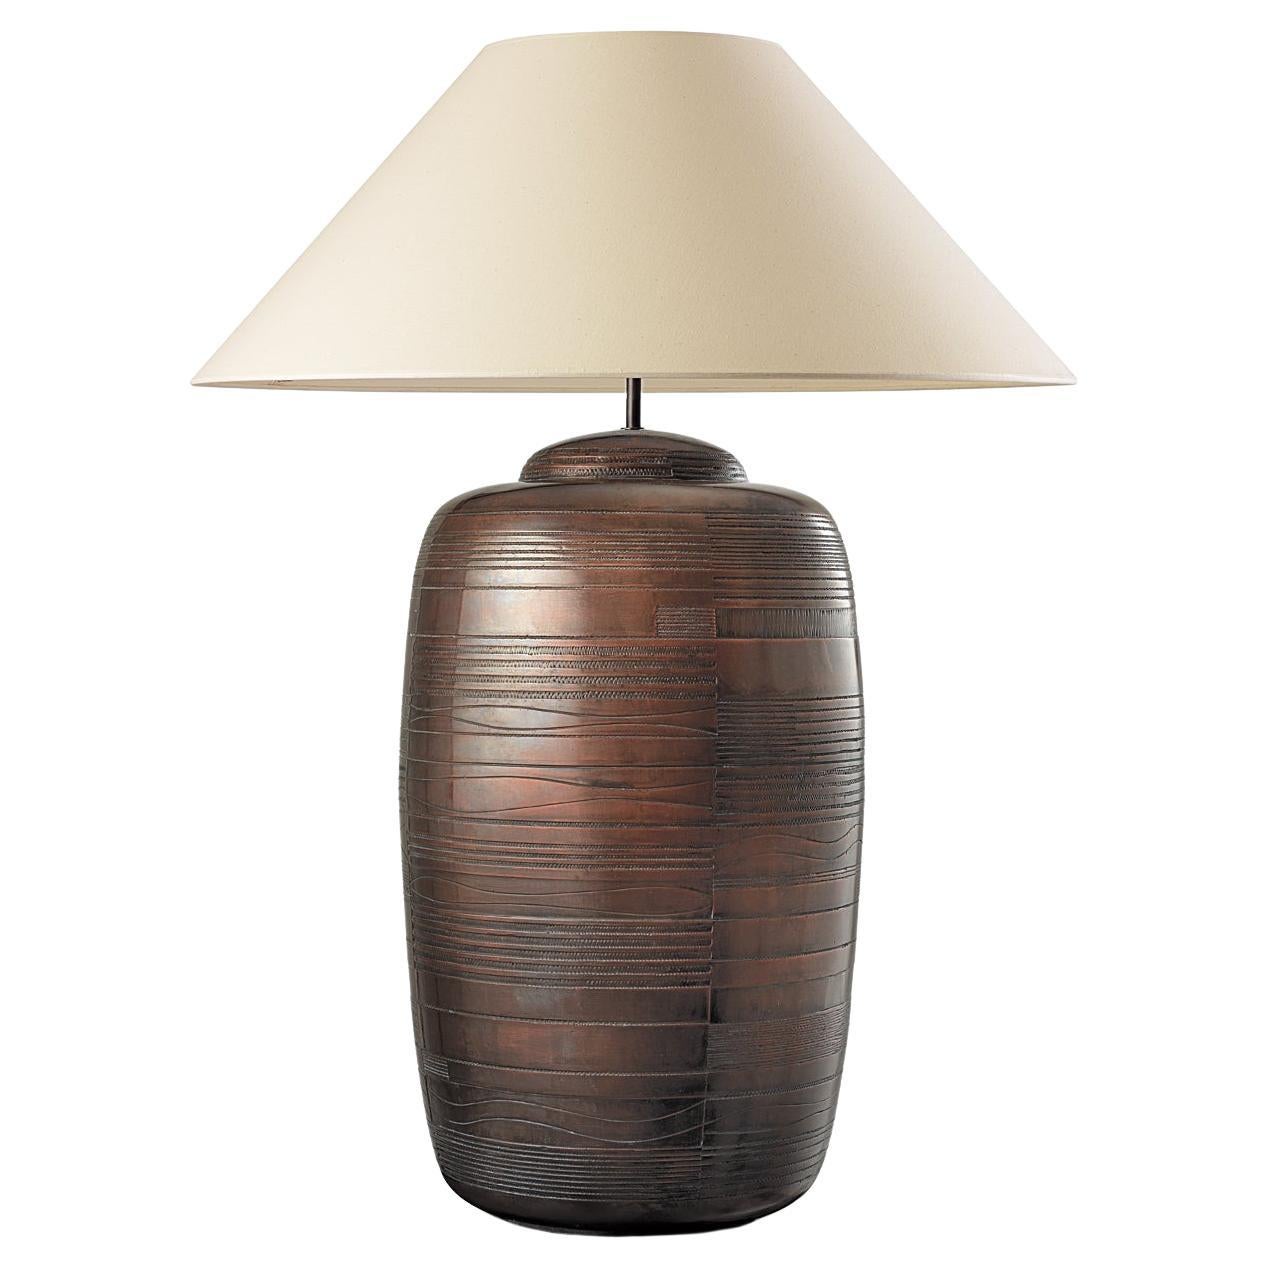 OPIO. Table Lamp in Aged Brass, Modern Art Deco Design Handmade Shade included For Sale